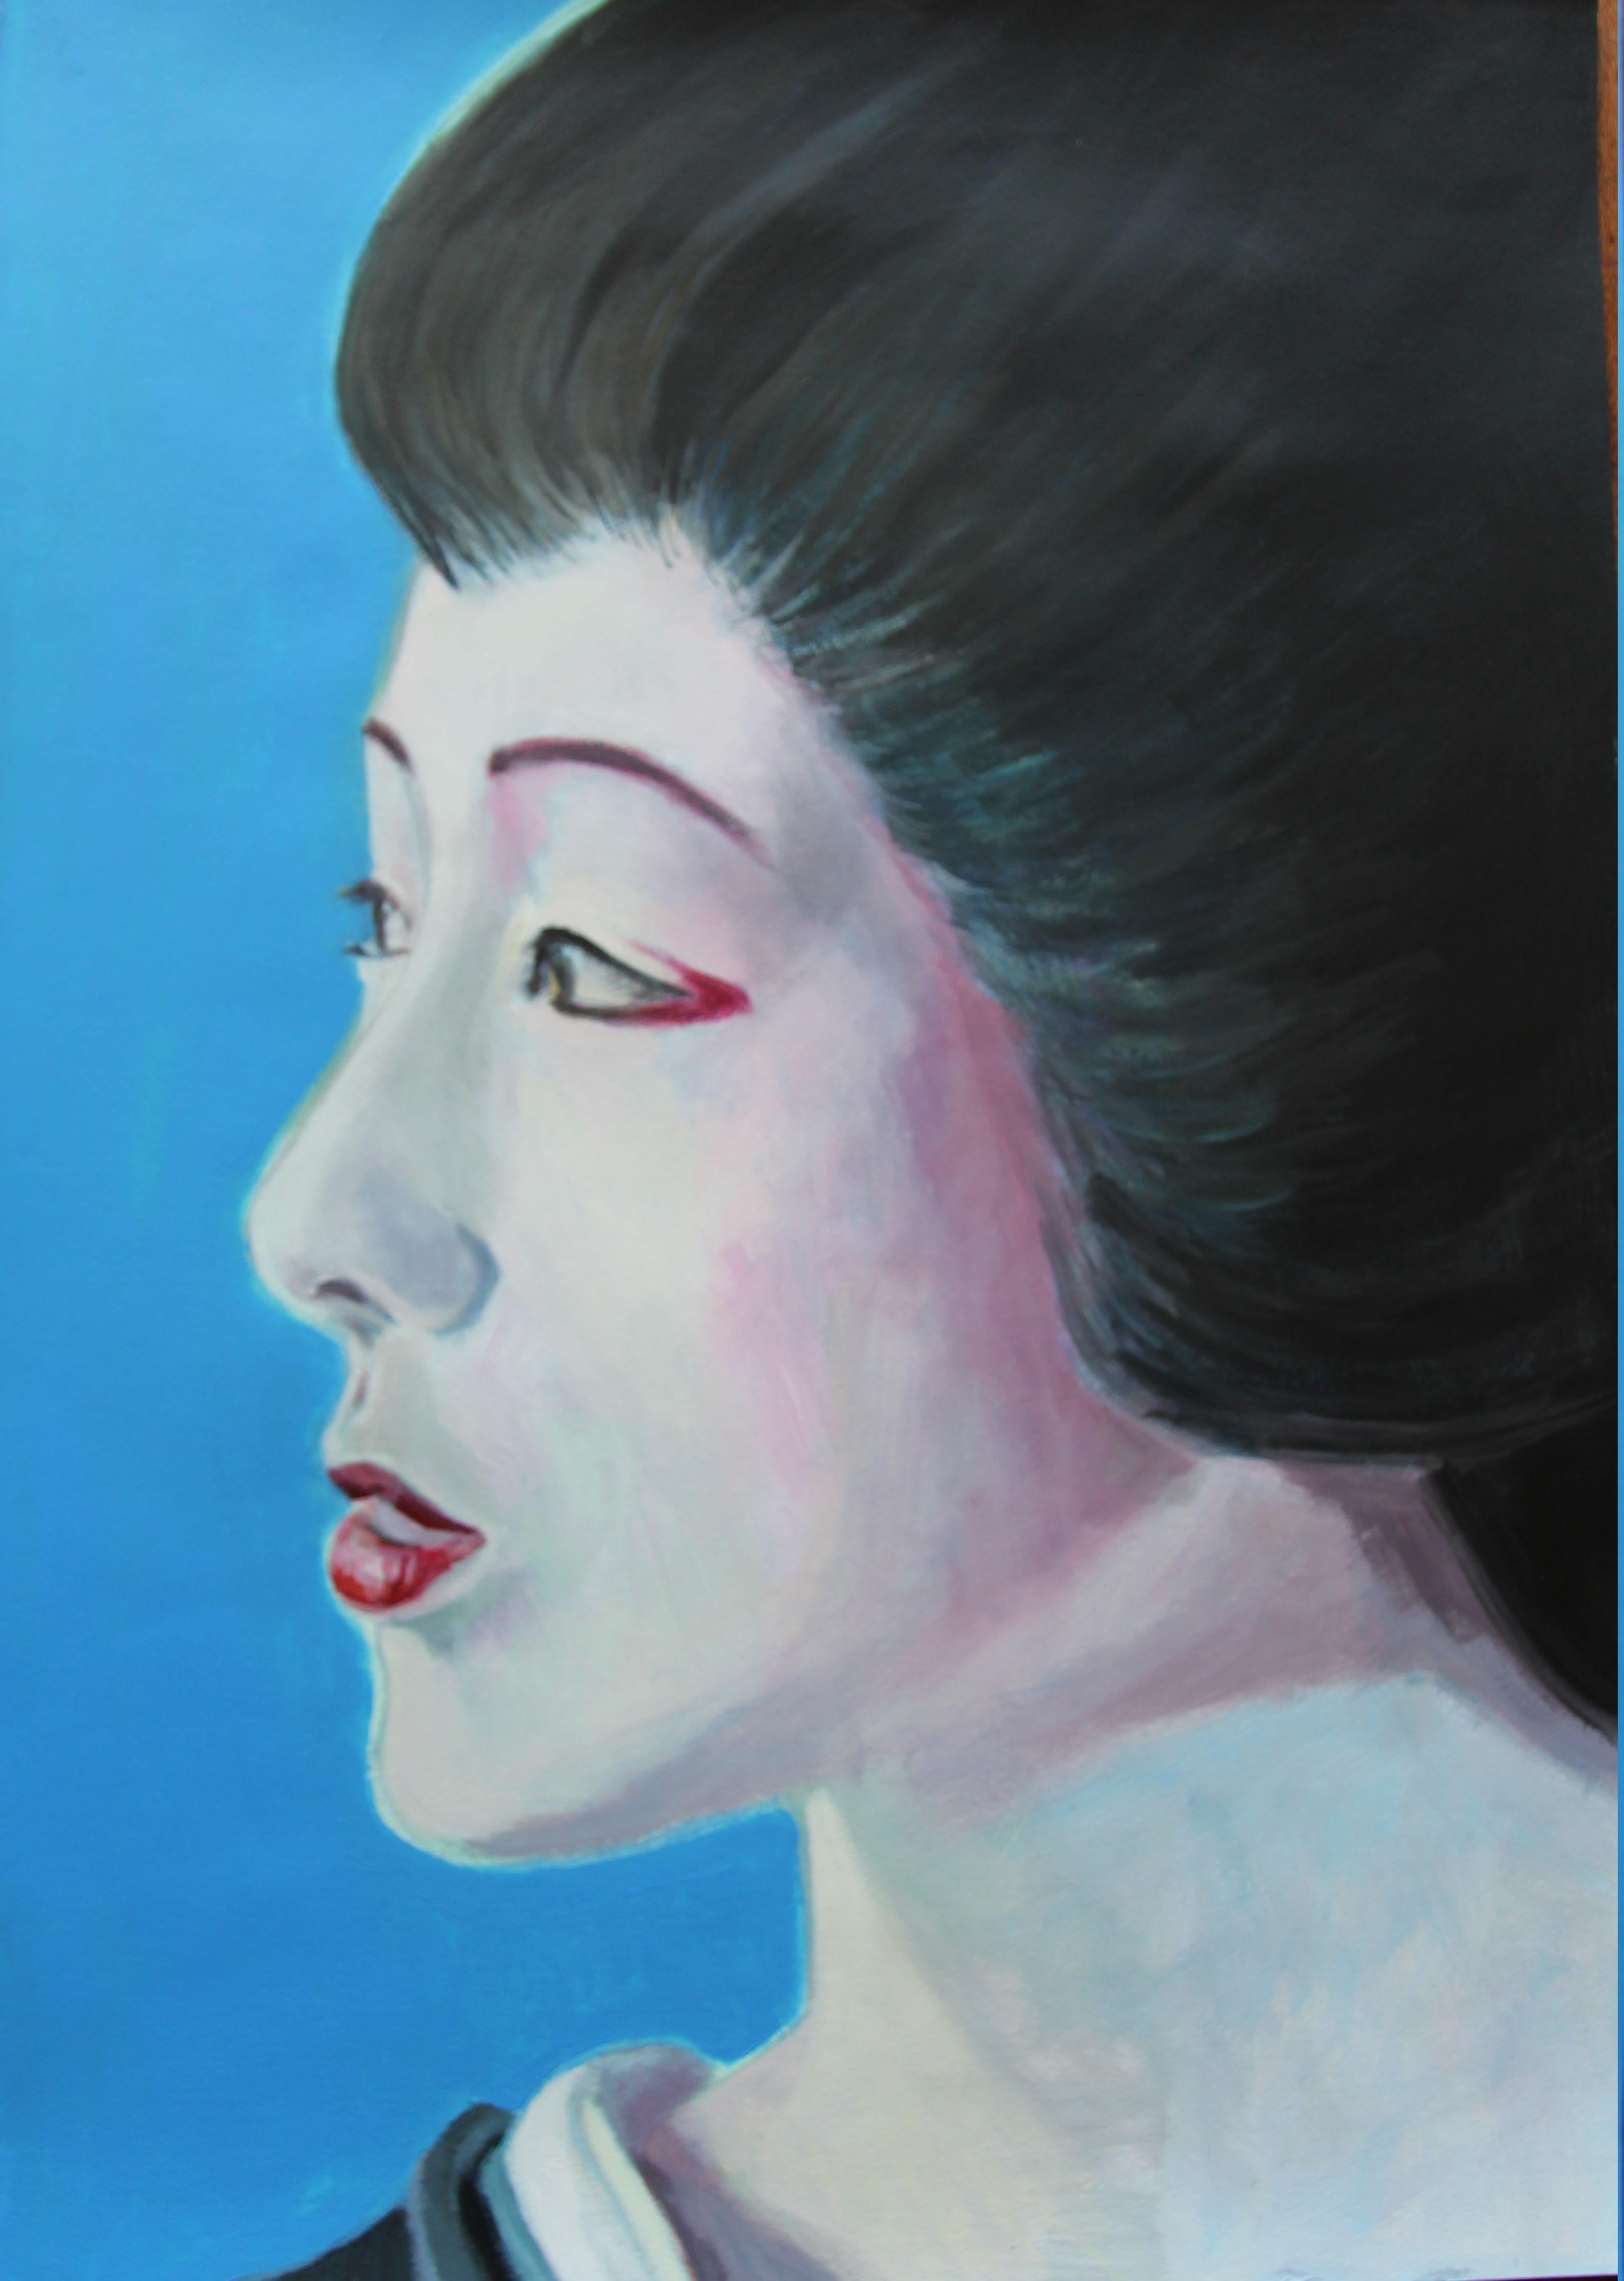 Acrylic work on archival quality paper. Represents a young Japanese woman looking far out as if searching for something, Expecting something or someone. :: Painting :: Expressionism :: This piece comes with an official certificate of authenticity